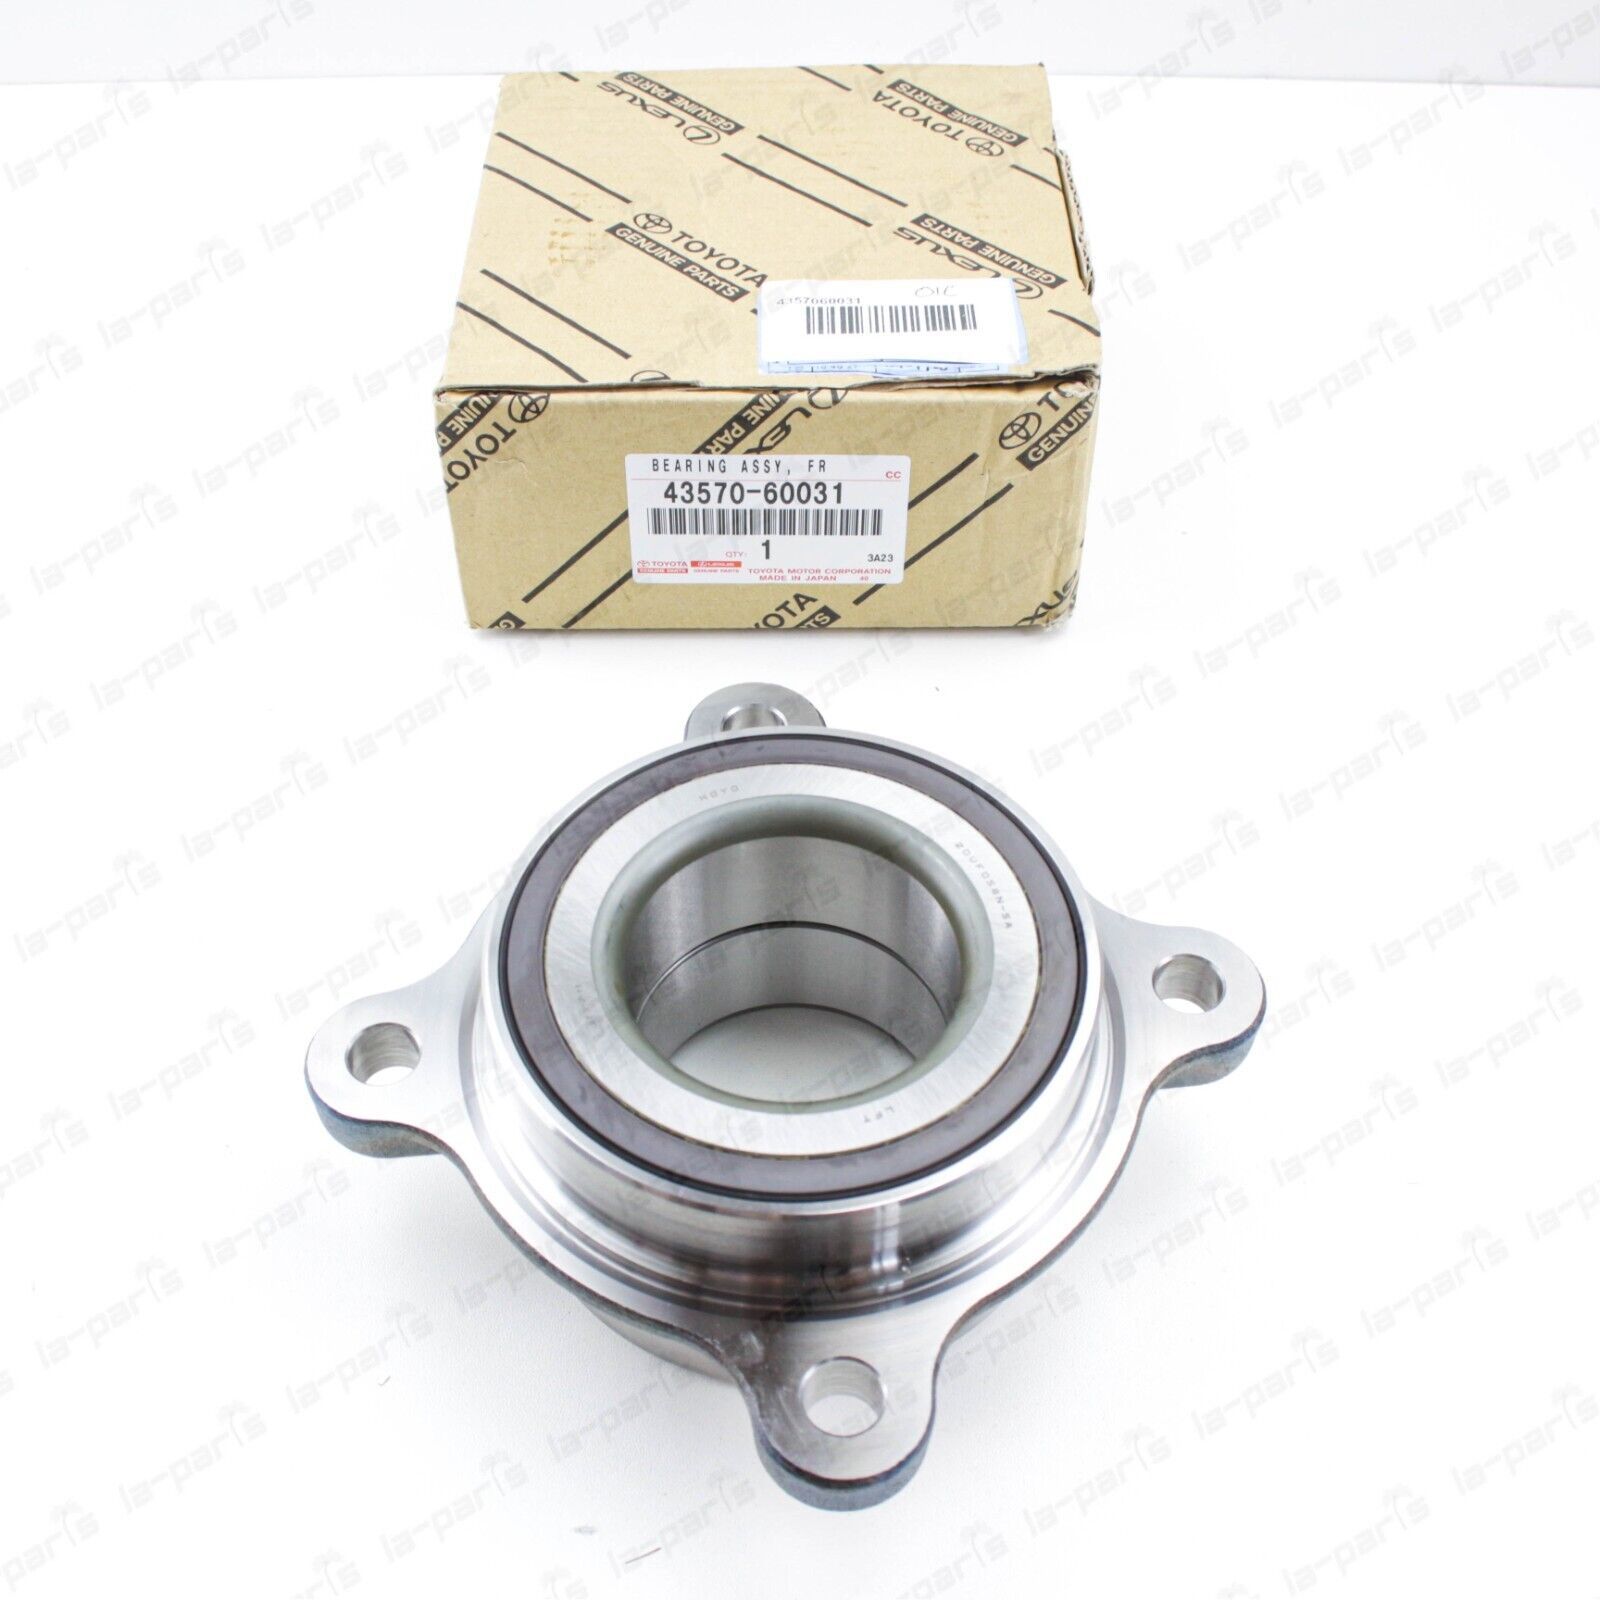 Primary image for New Genuine Toyota Tundra Land Cruiser Sequoia LX570 Front Axle Wheel Bearing